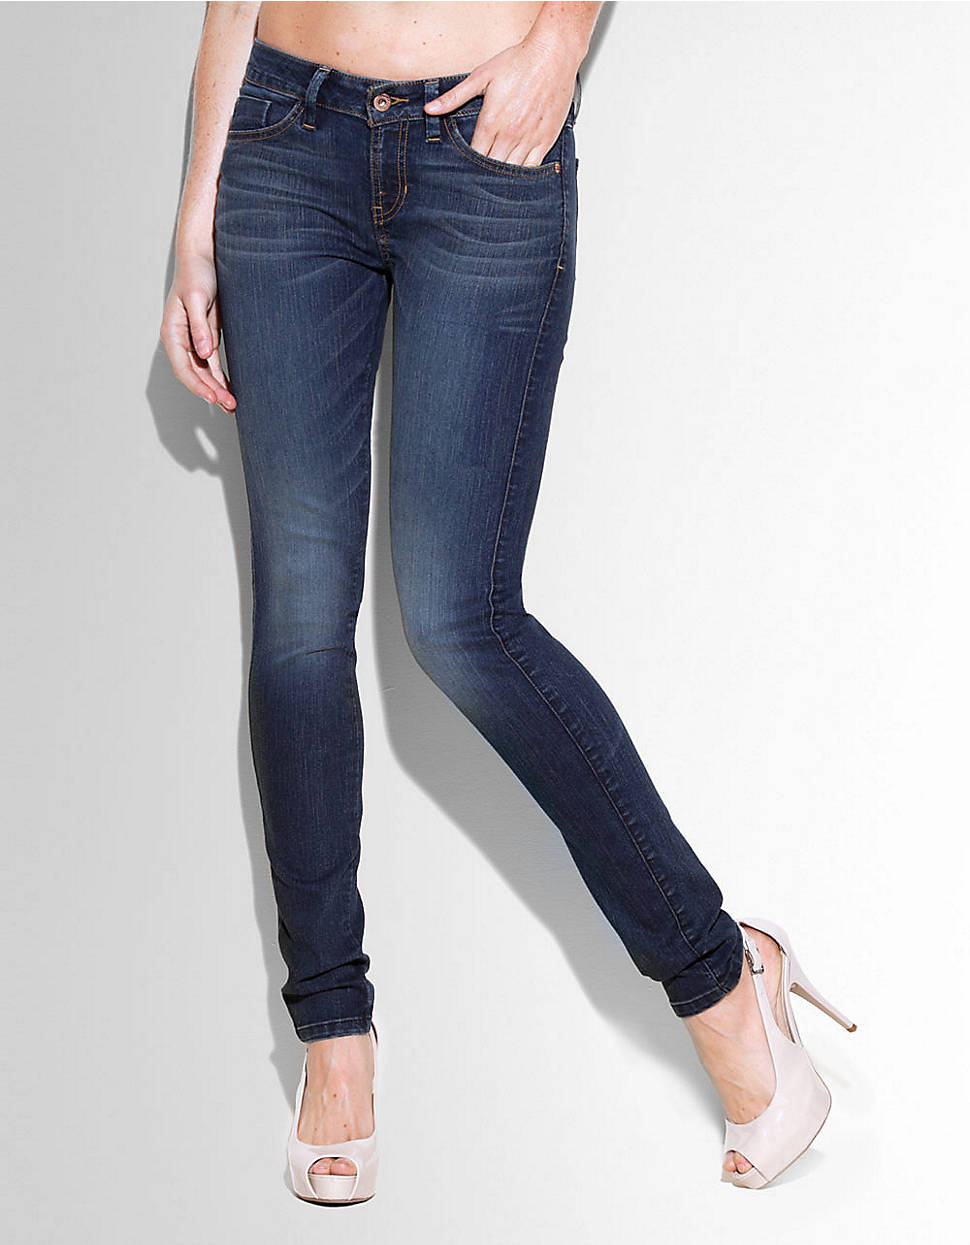 Guess Brittney Skinny Jeans in Blue - Lyst